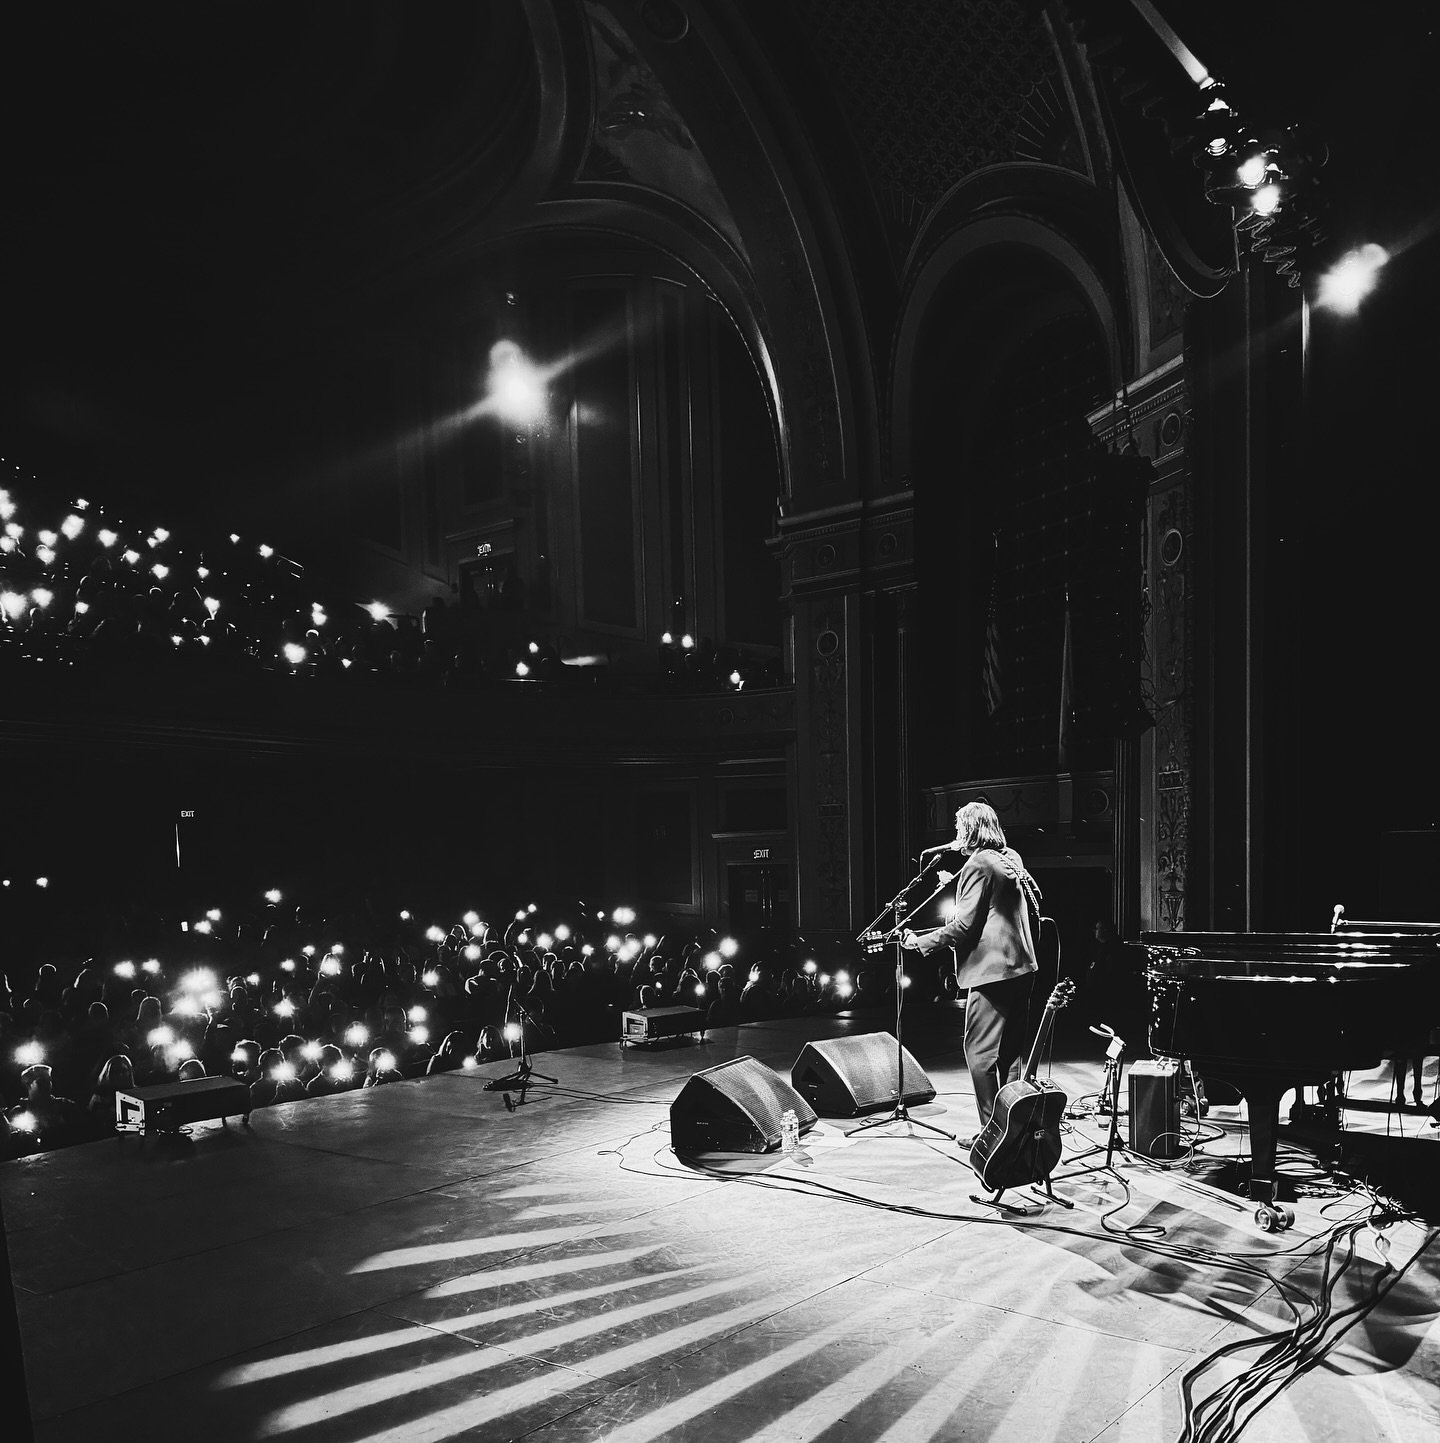 What a thrill to send some sound into the Veterans Memorial Auditorium last night.  Grateful to my friend @actualbenfolds for making me a part of so many musical adventures the past couple of years.  Getting to share songs and stories with my hometow